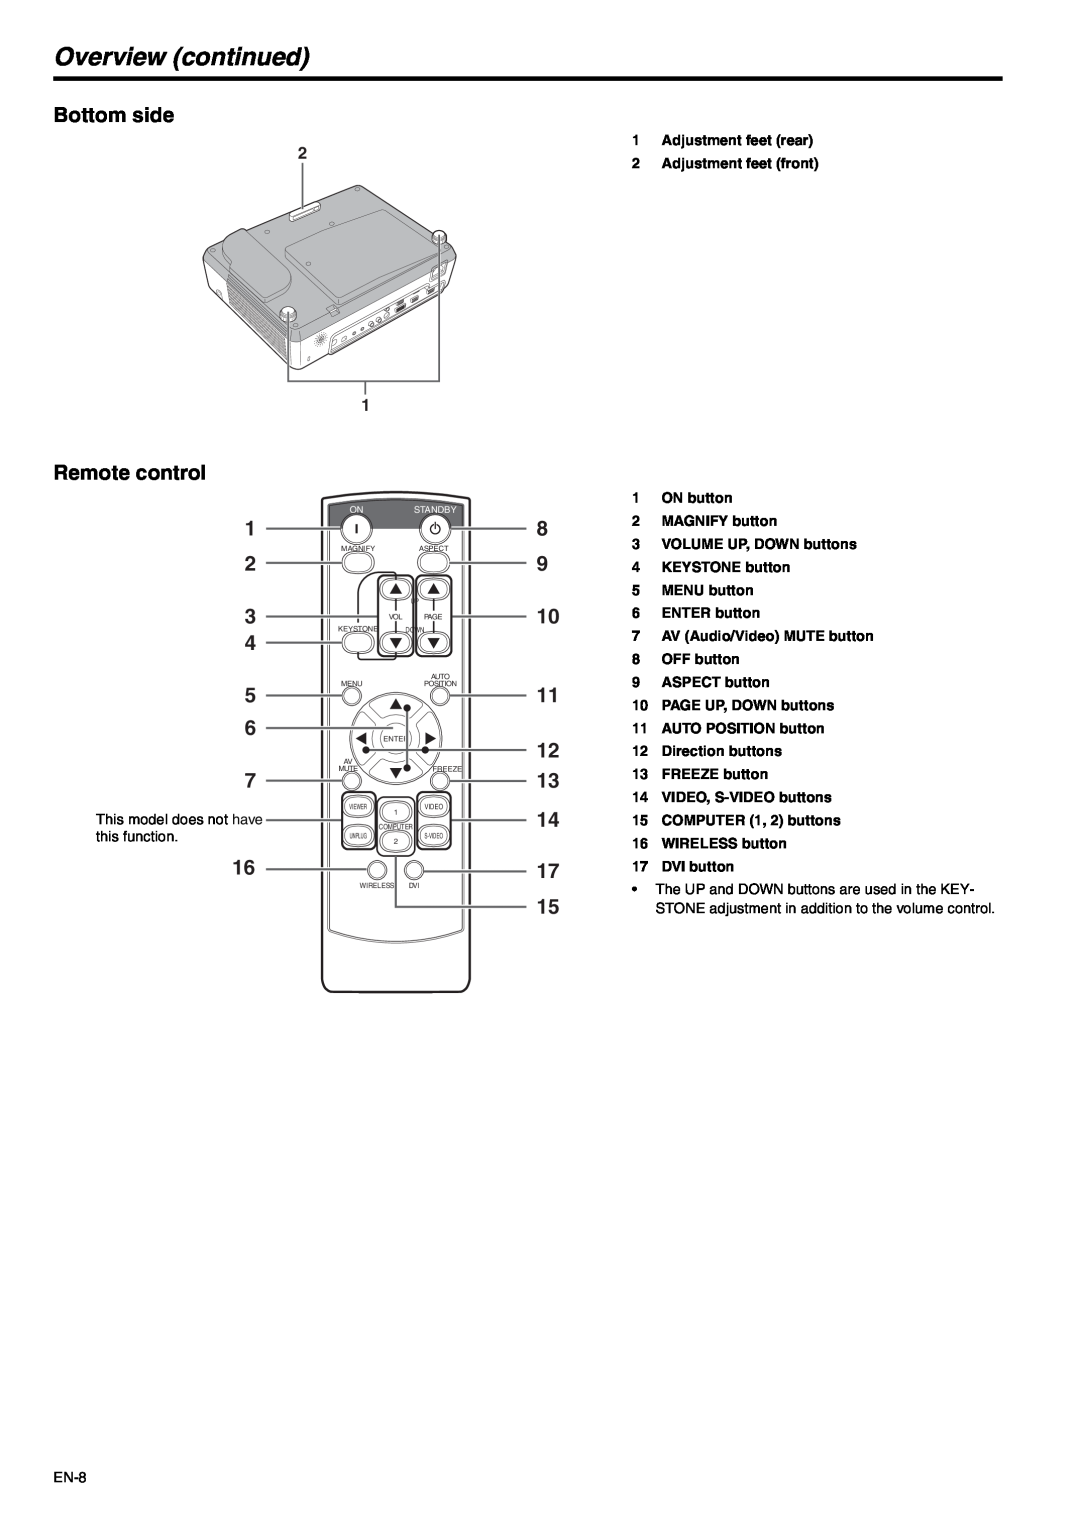 Mitsubishi Electronics XD530U, XD530E user manual Overview continued, Bottom side, Remote control 